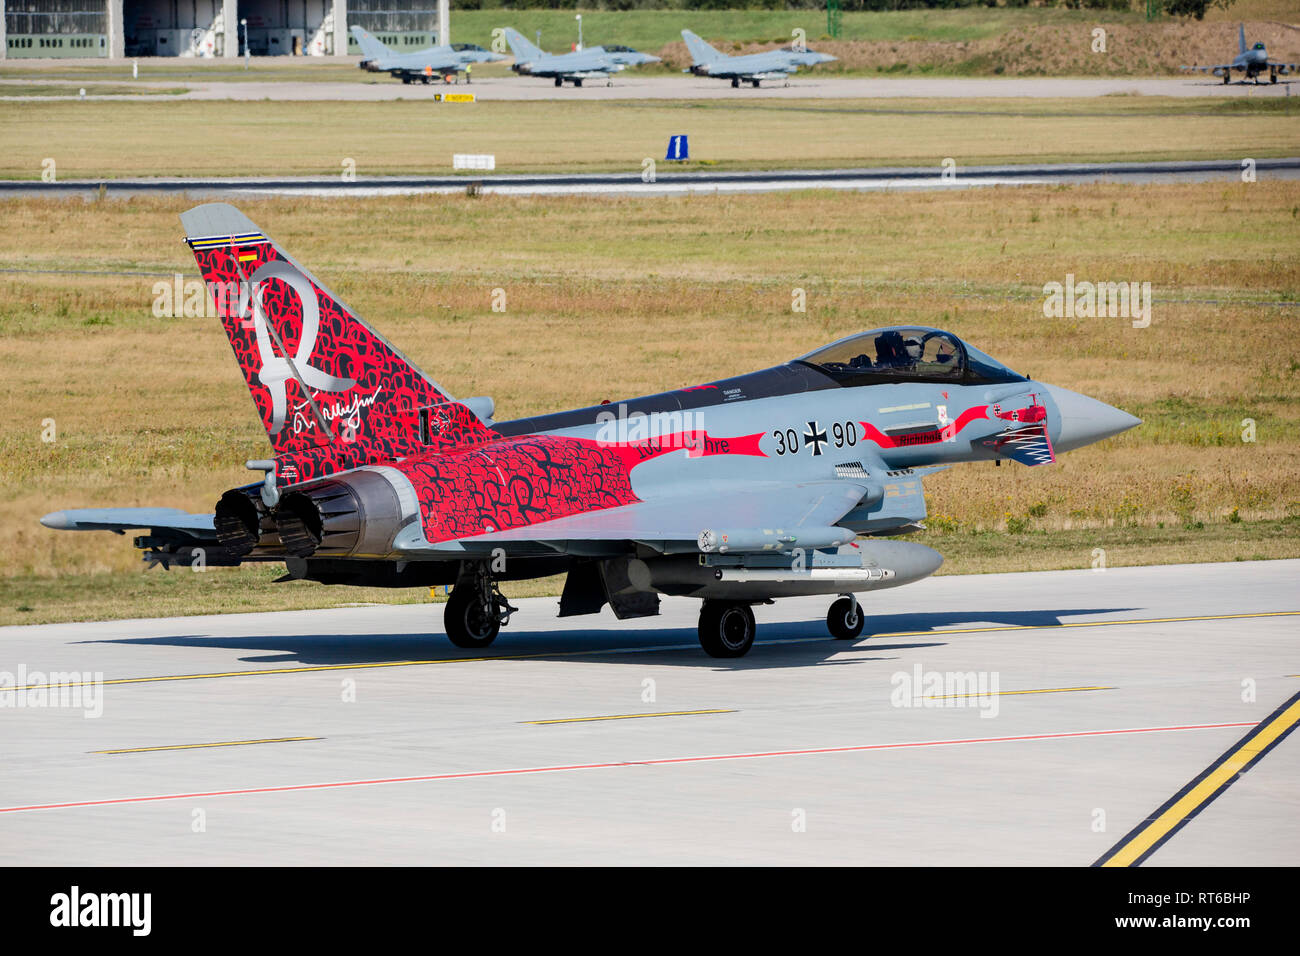 German Air Force Eurofighter in special livery, Laage, Germany. Stock Photo